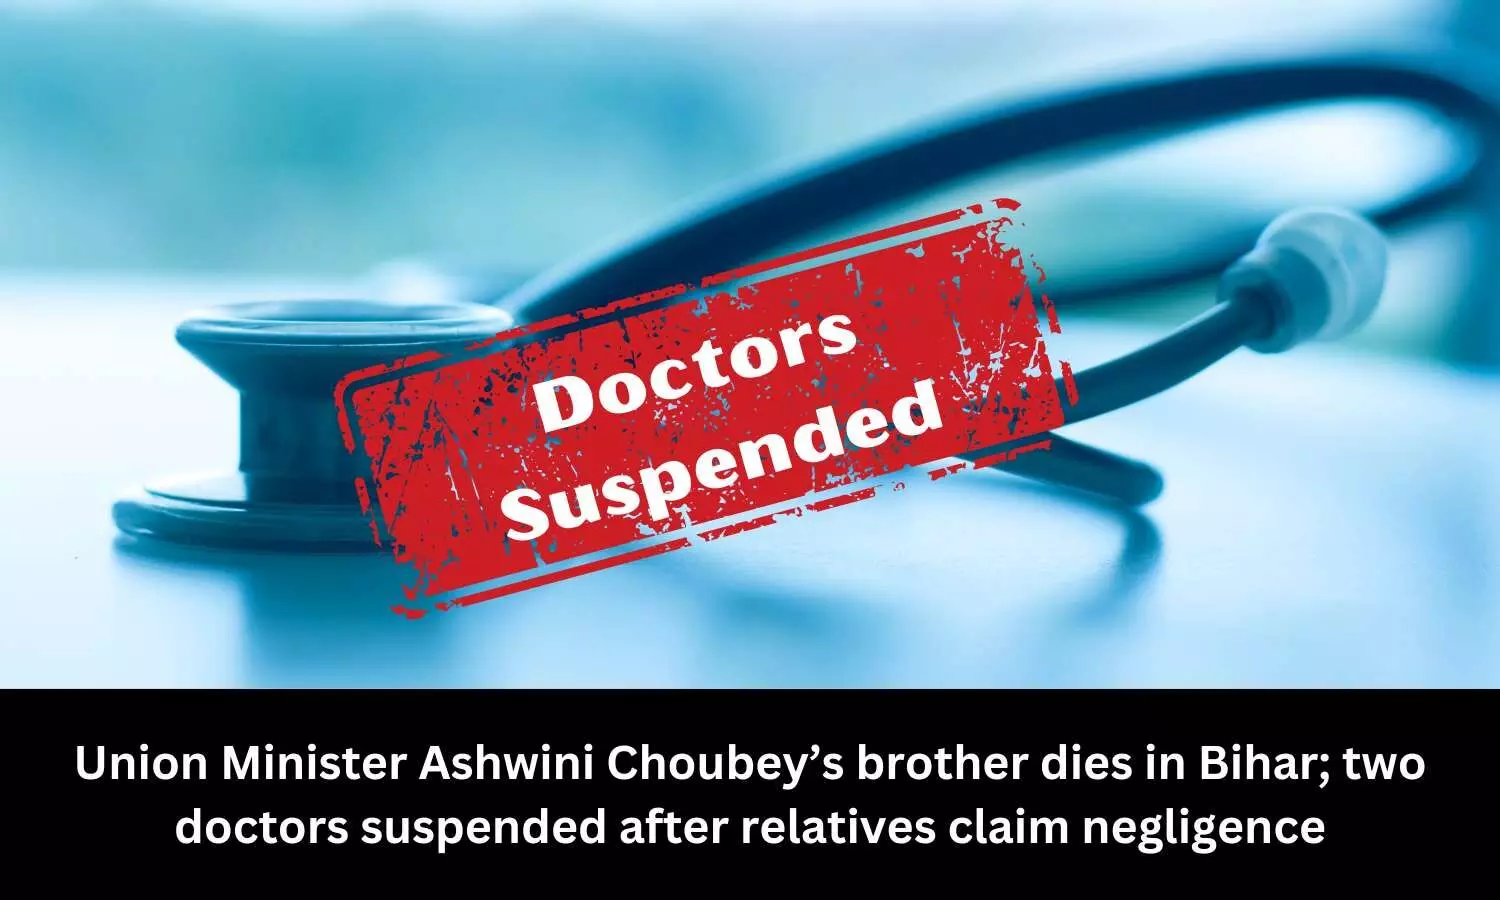 Union Minister Ashwini Choubeys brother dies in Bihar; two doctors suspended after relatives claim negligence